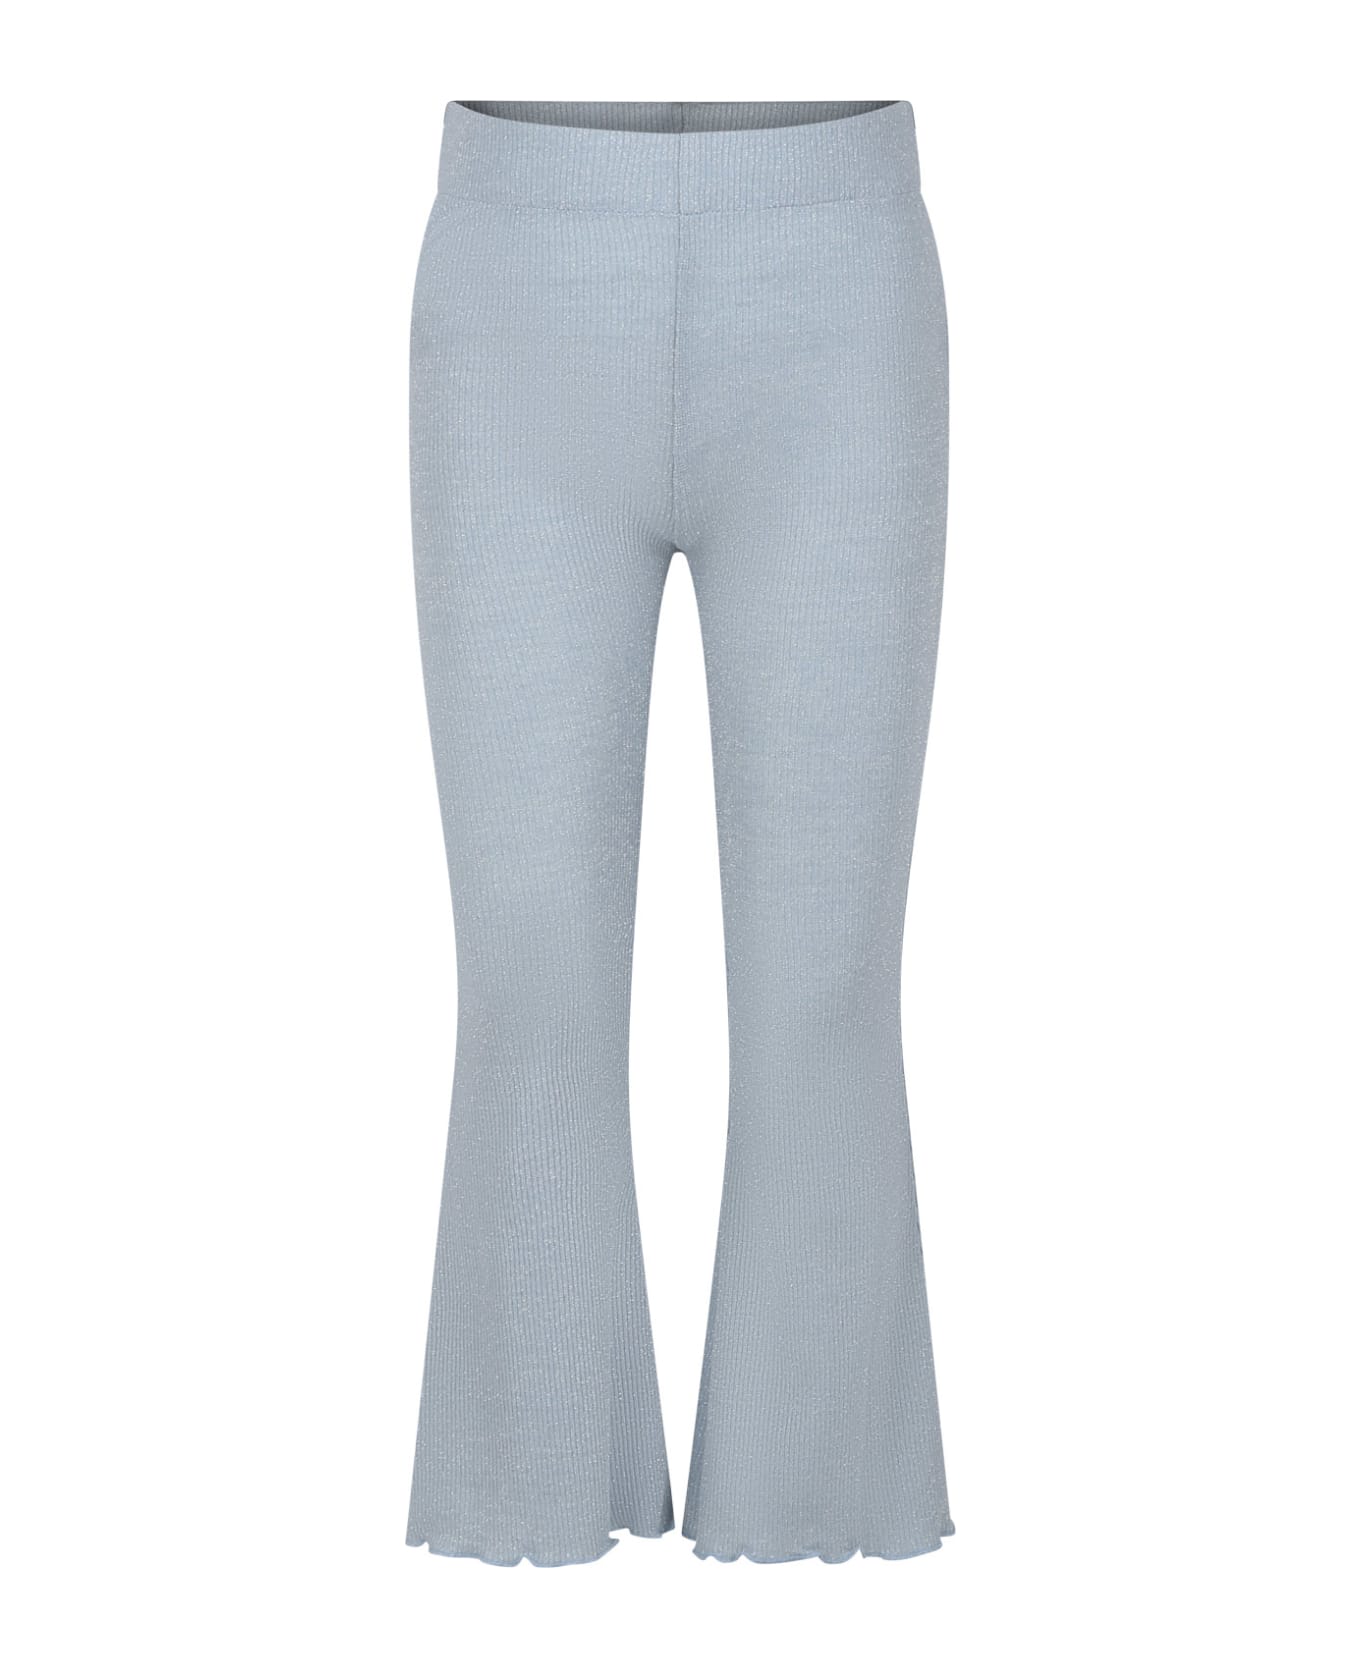 Caffe' d'Orzo Light Blue Trousers For Girl With Lurex - Light Blue ボトムス